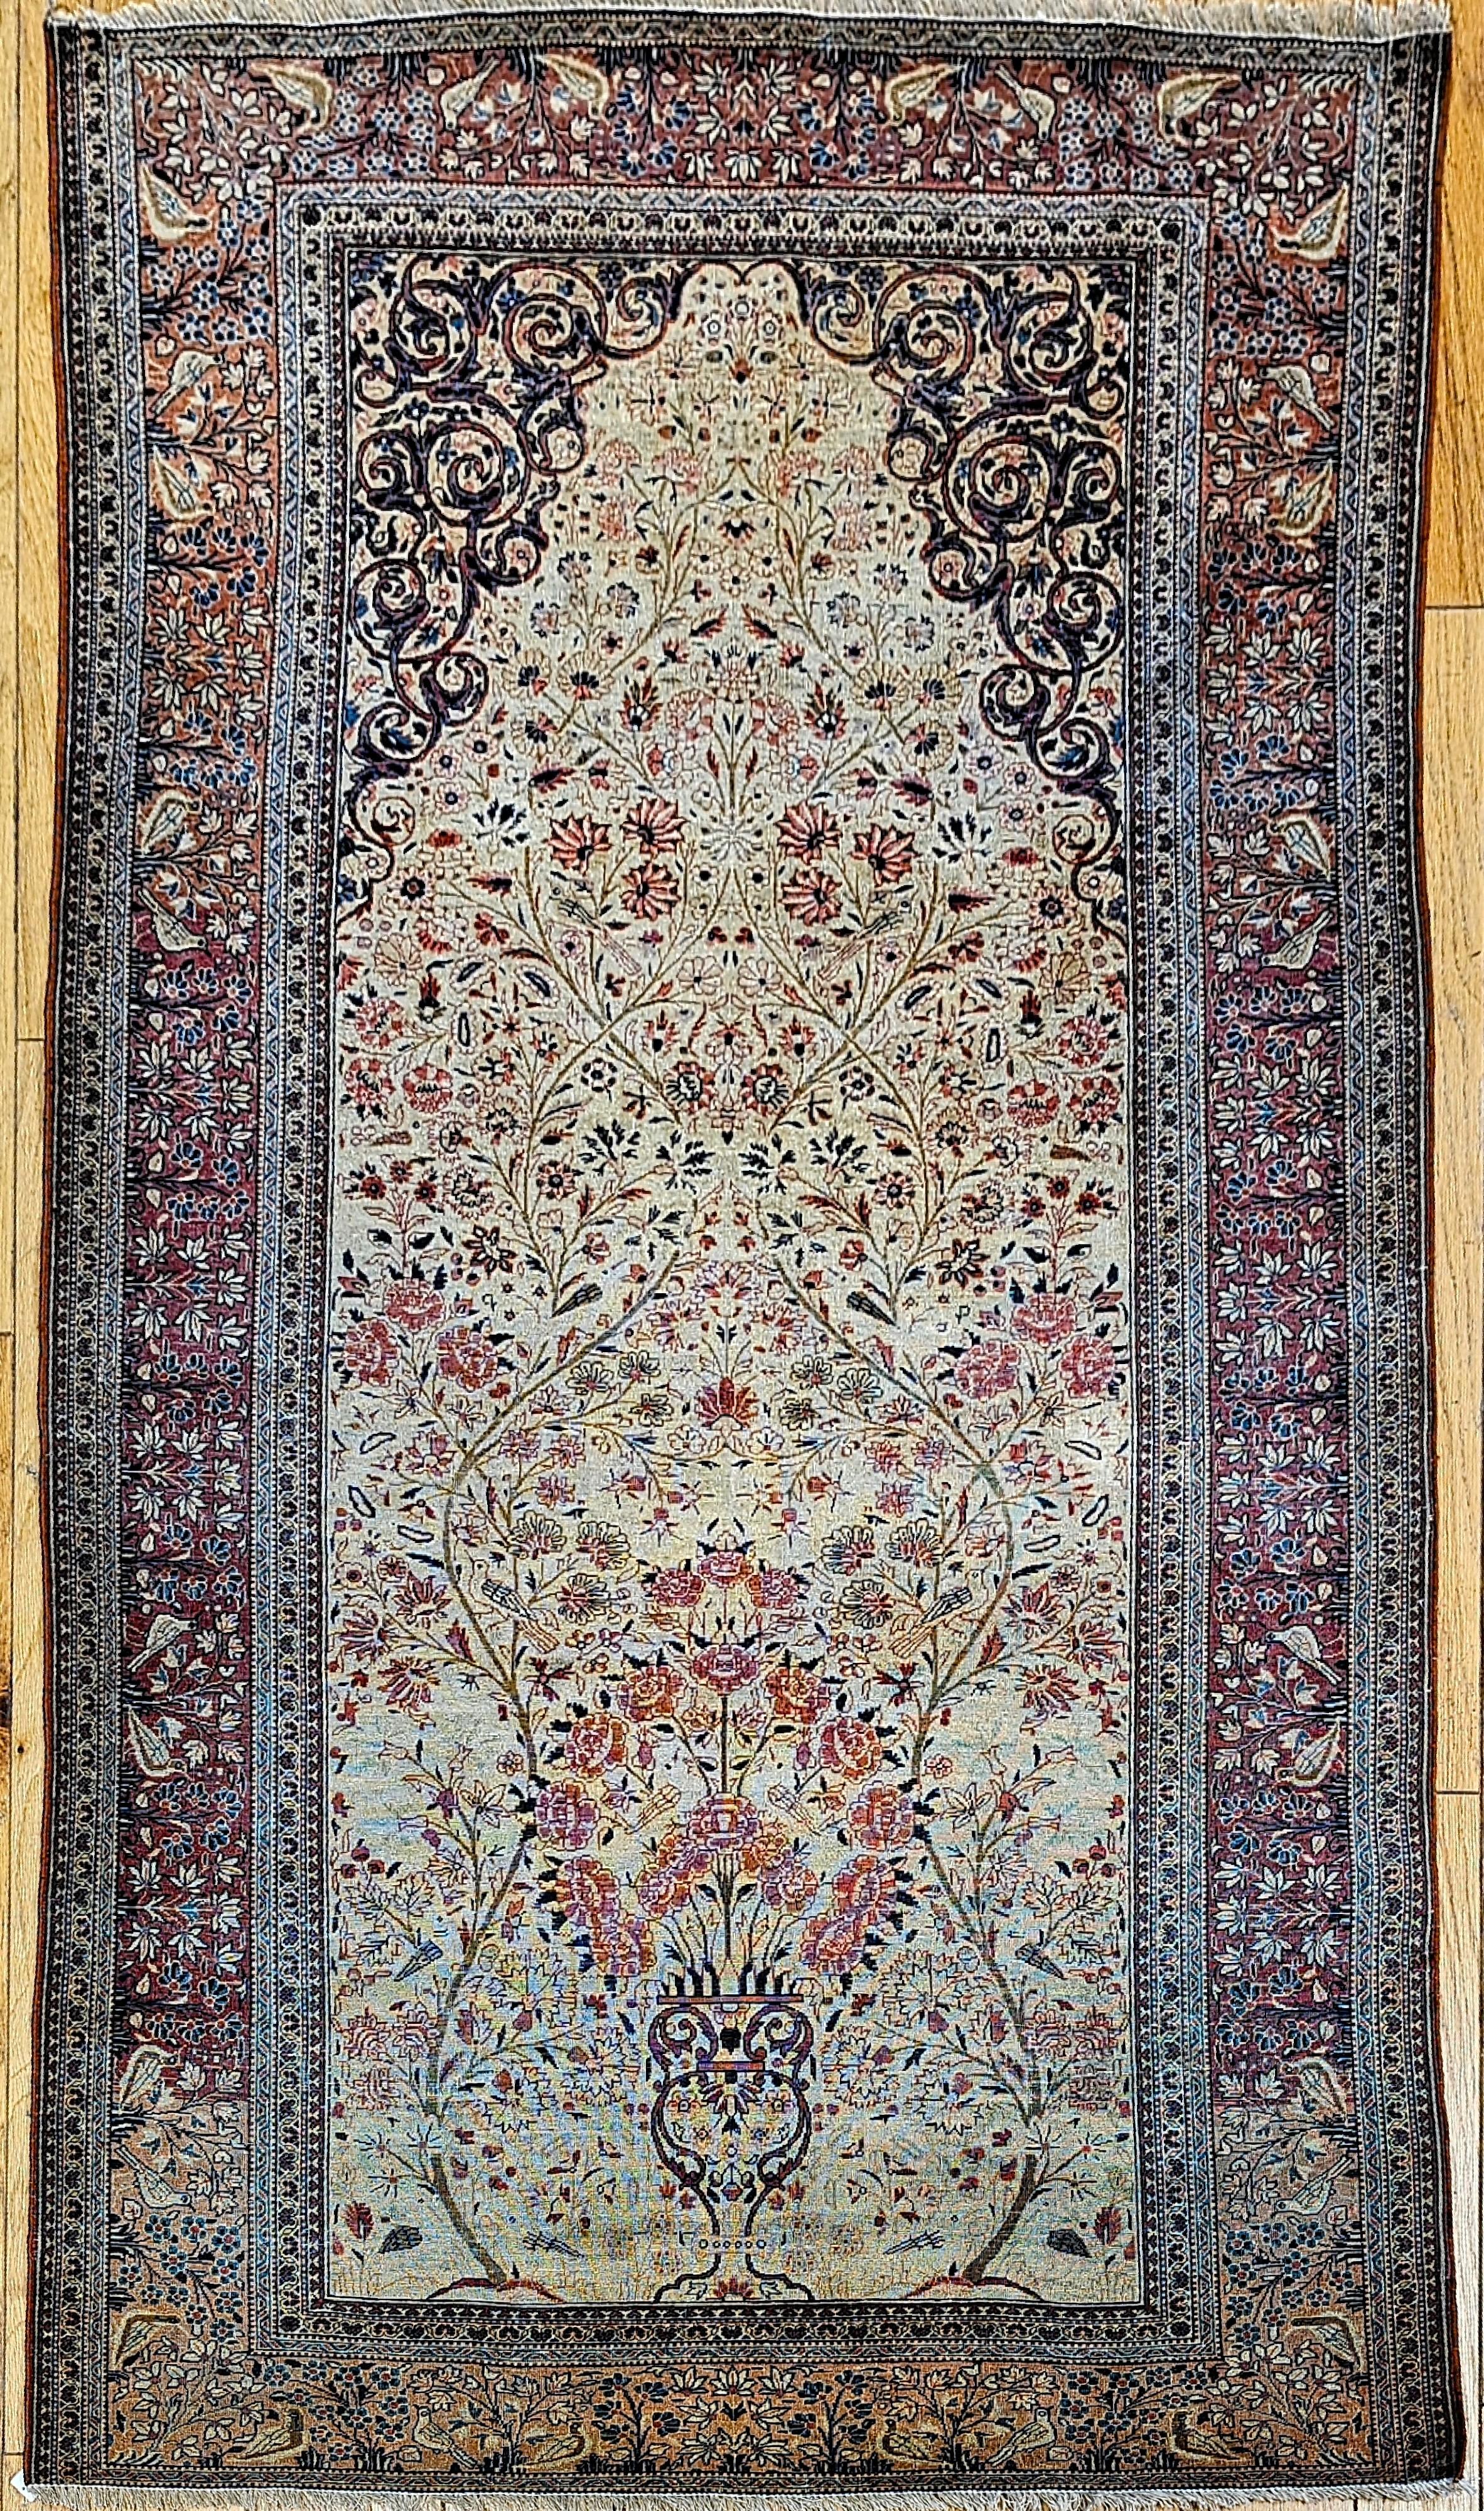 19th Century Persian Kashan Vase “Tree of Life” Rug in Ivory, Brick Red, Navy For Sale